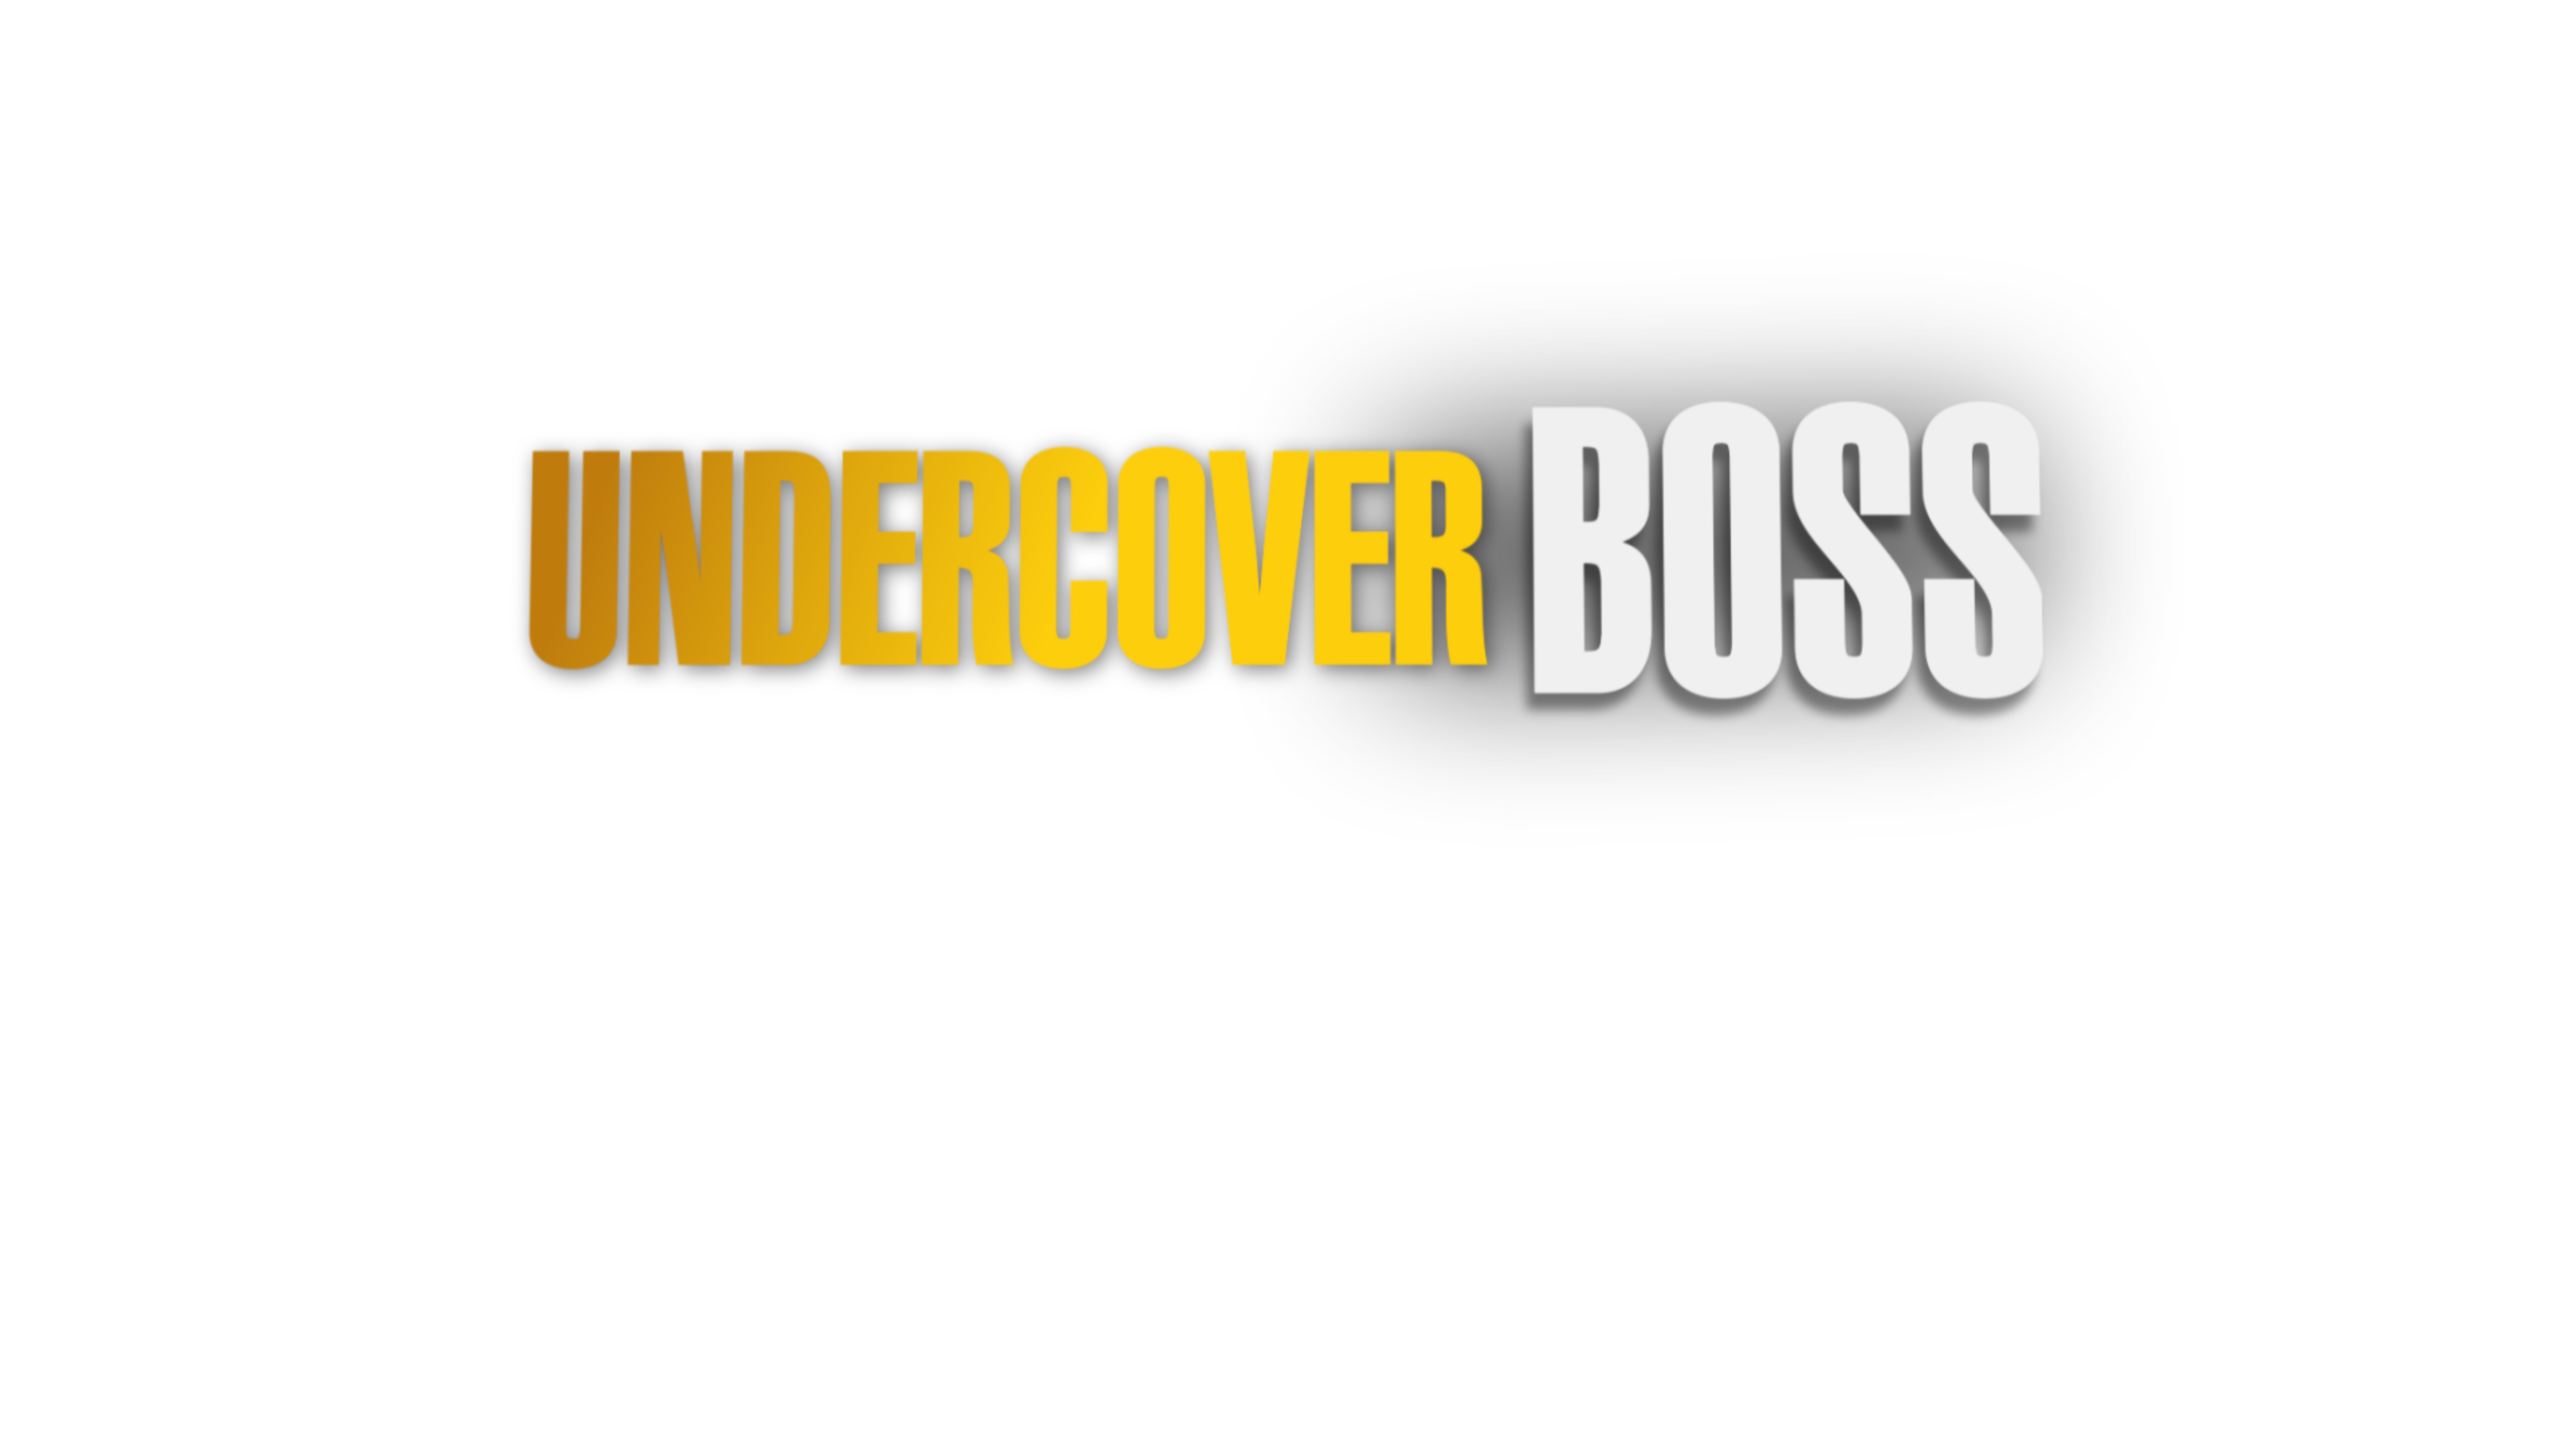 The UNDERCOVER BOSS logo with Smoothie King CEO Wan Kim.